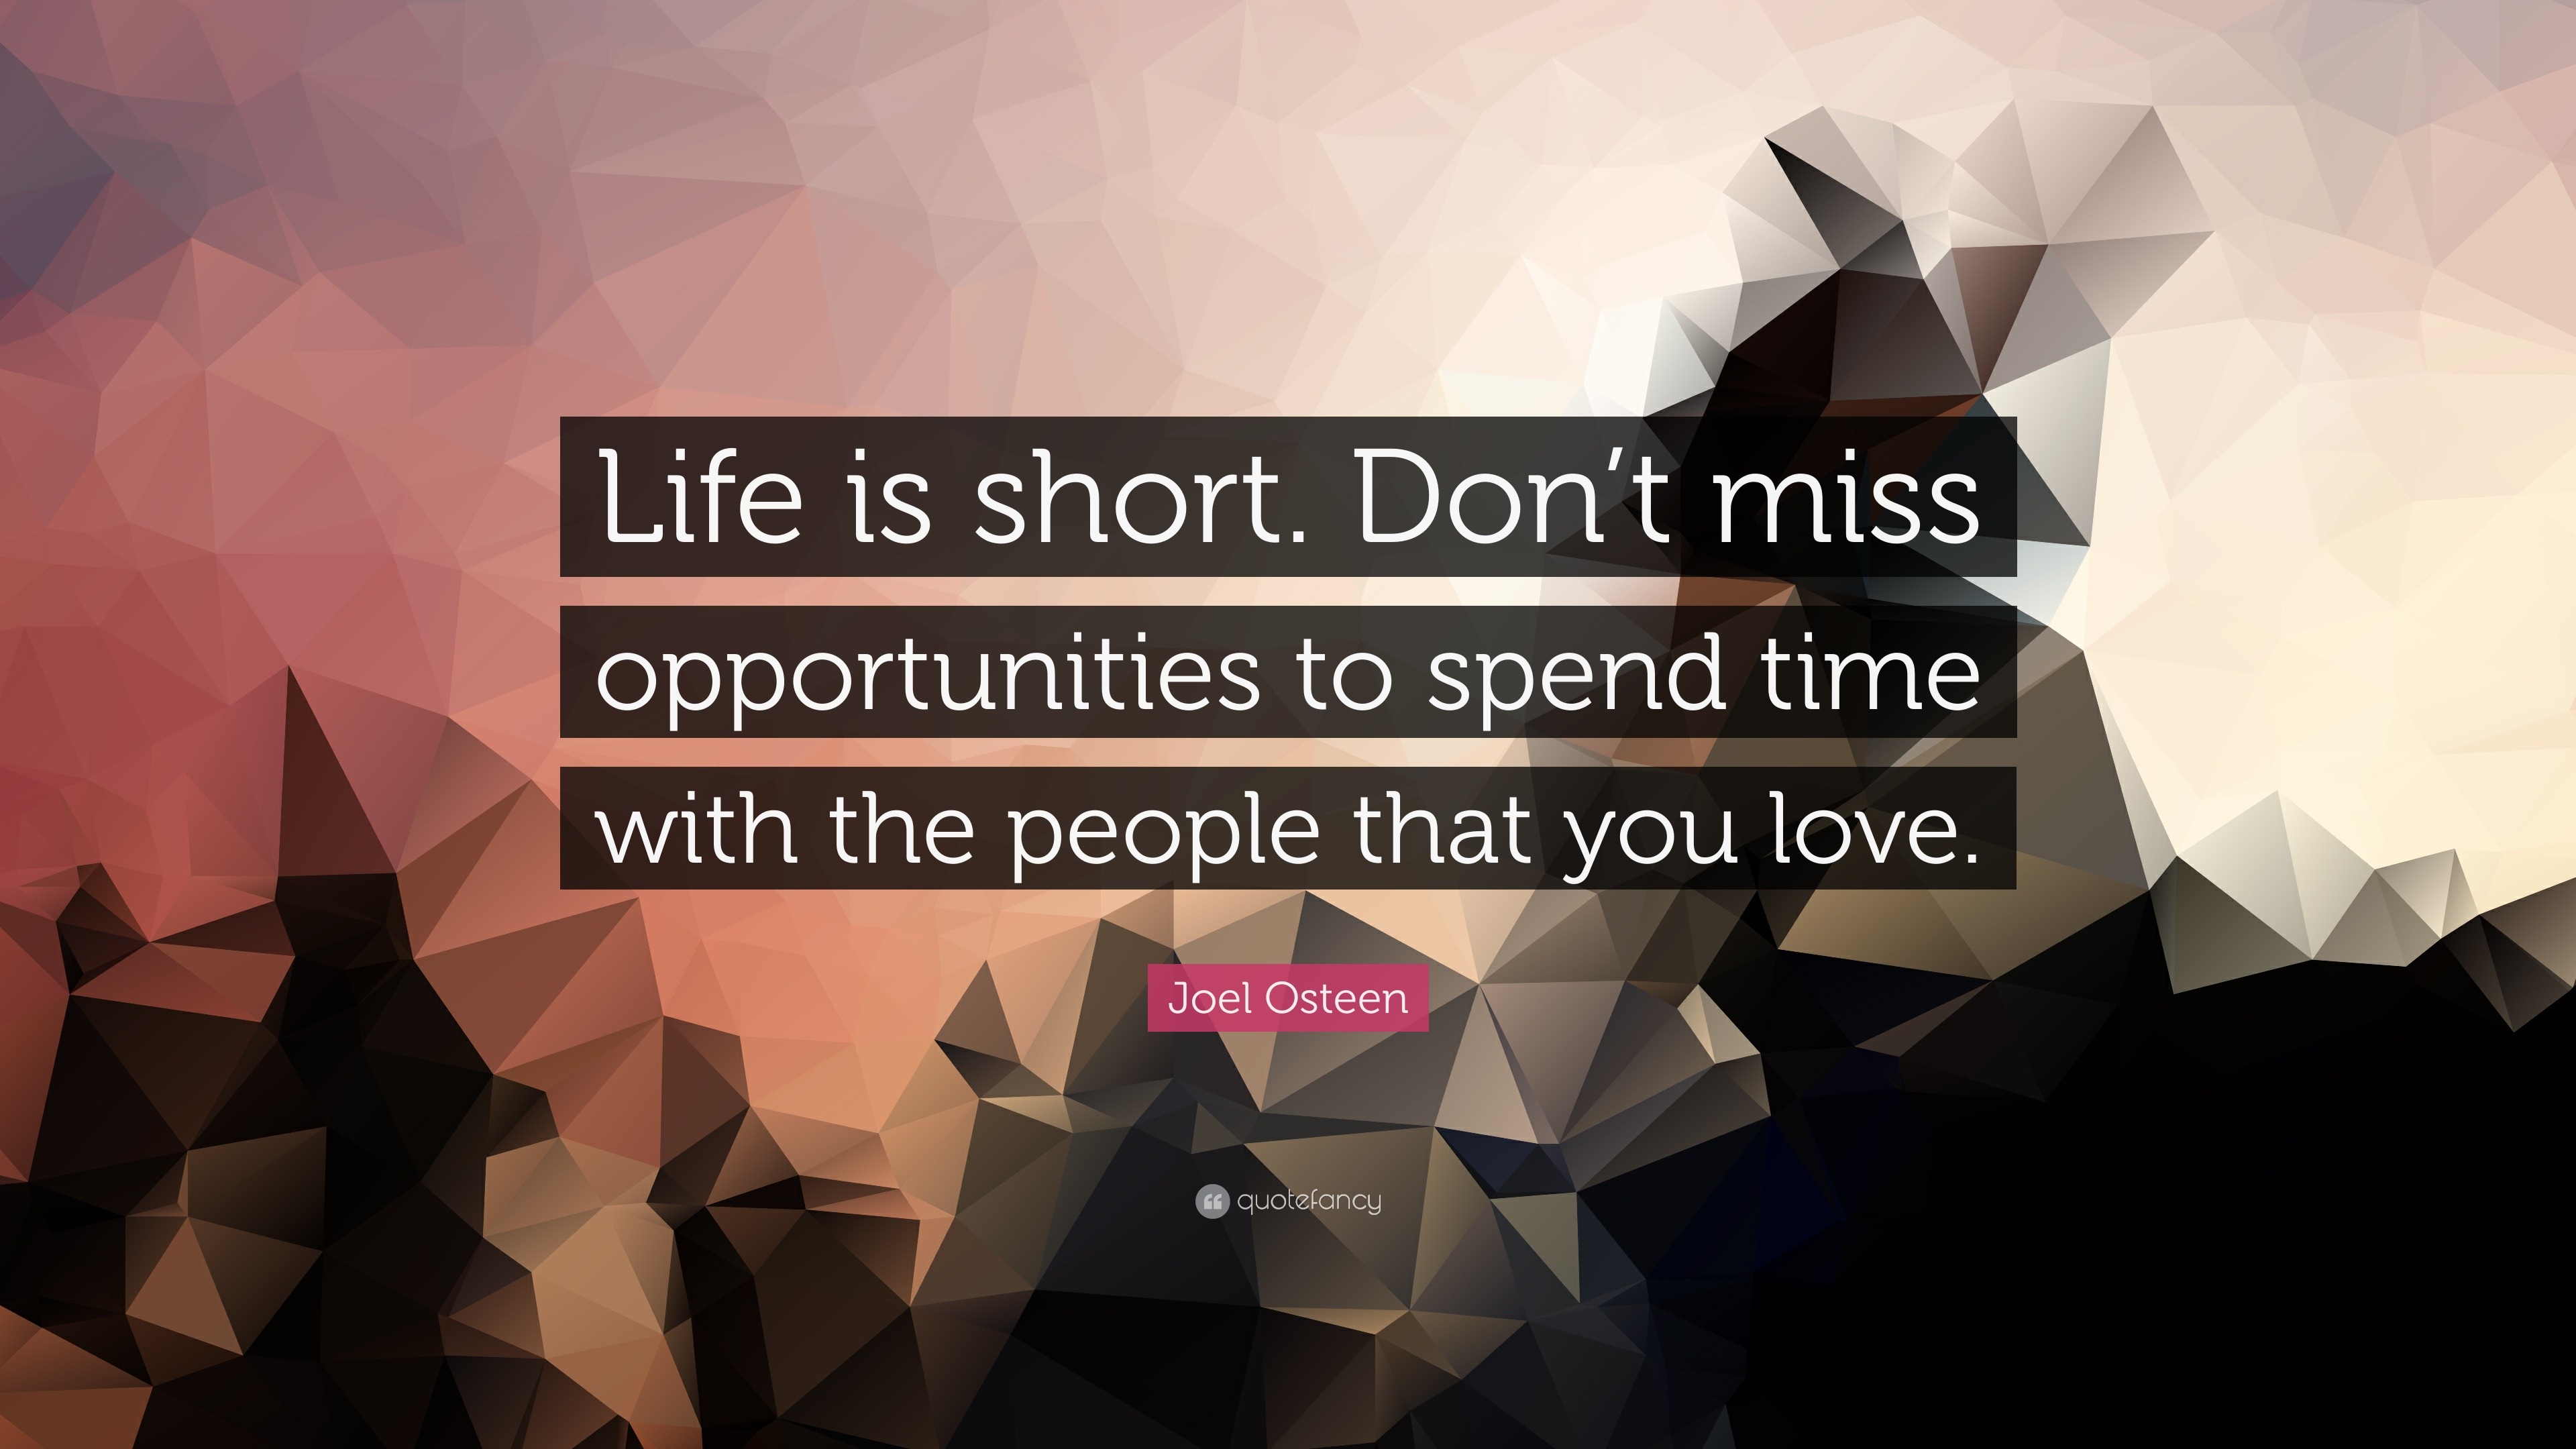 Joel Osteen Quote “Life is short Don t miss opportunities to spend